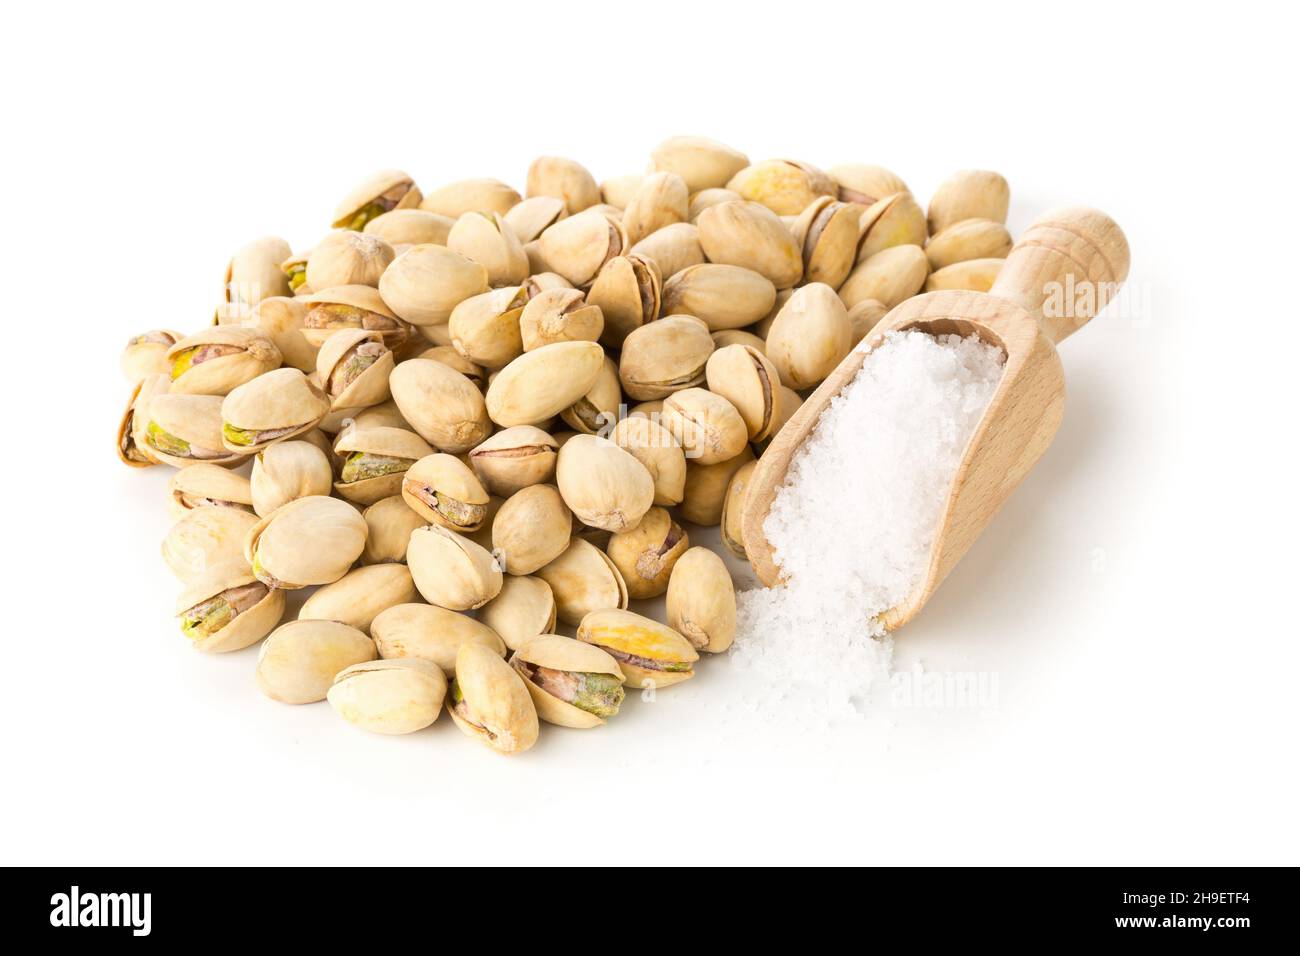 Heap of salted, roasted green pistachio nuts snack over white background with sea salt in wooden scoop, healthy food snack, selective focus Stock Photo